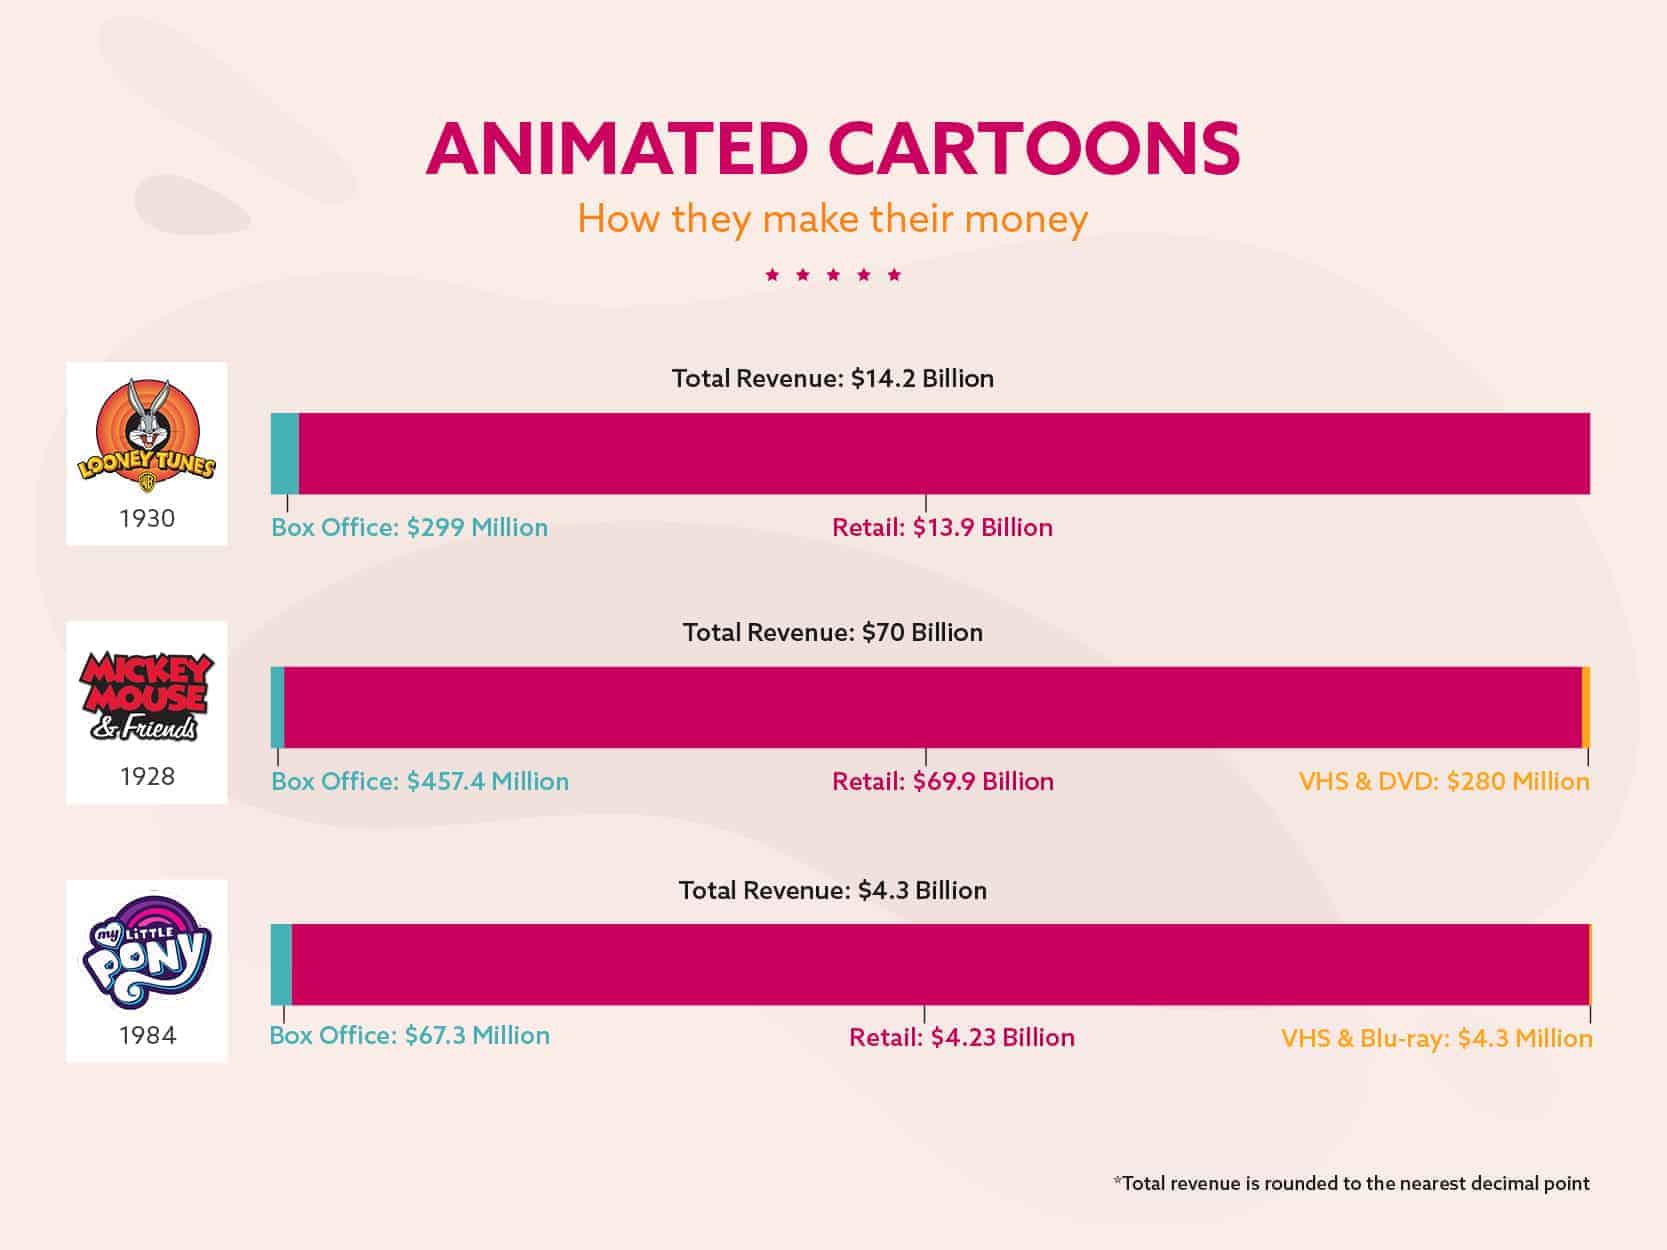 Animated Cartoons – How They Make Their Money